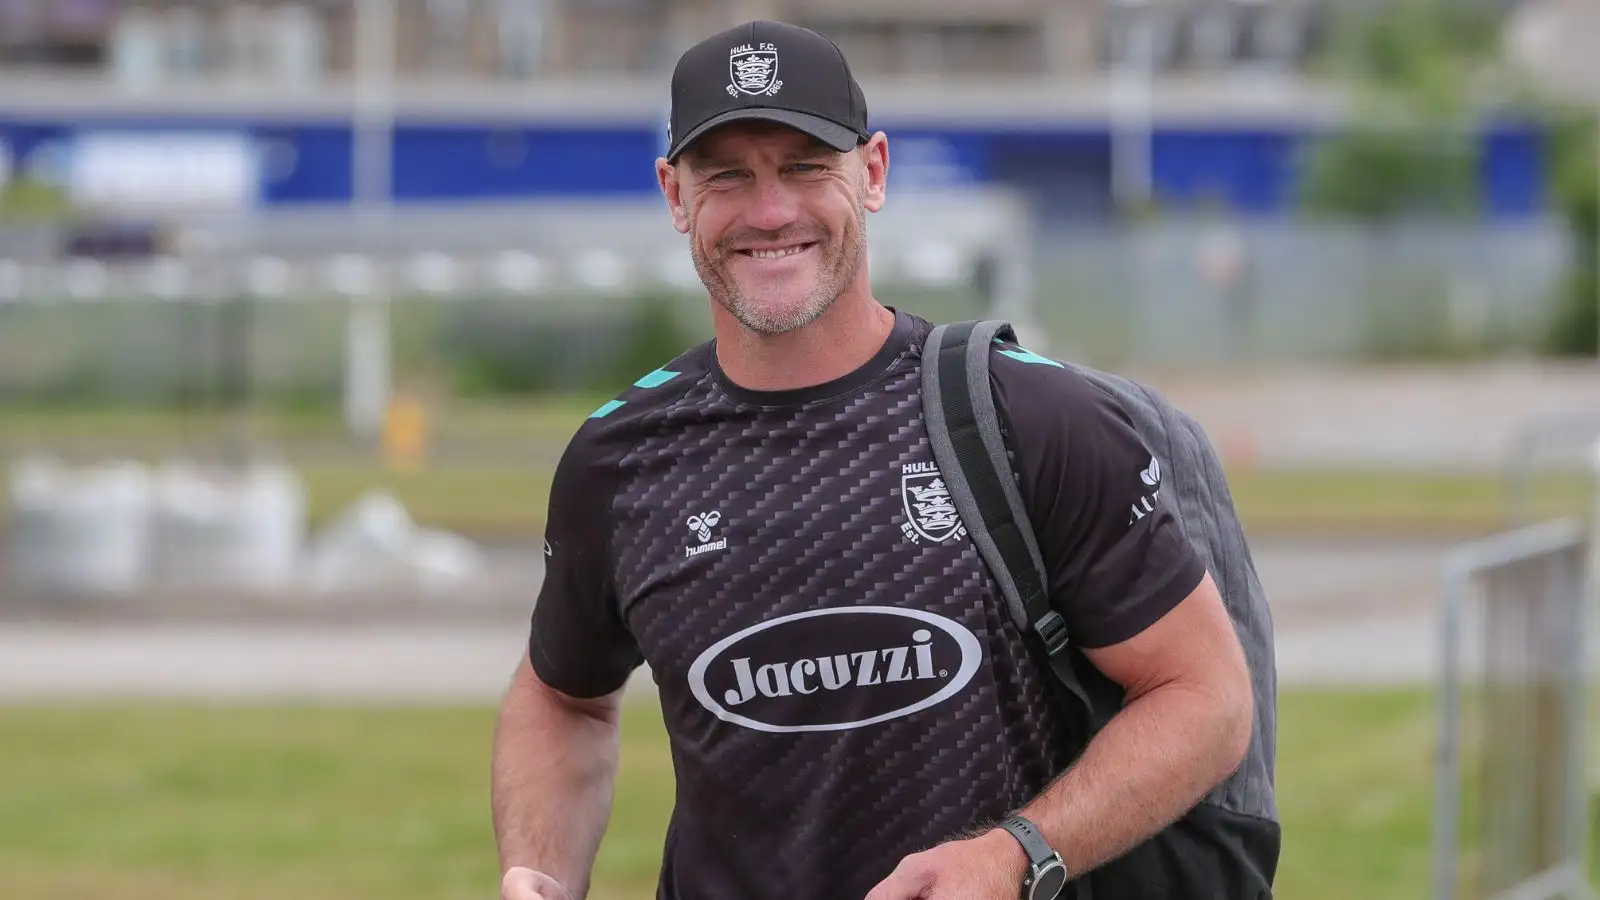 Gareth Ellis lands new role following Hull FC departure: ‘I’m very excited by this opportunity’